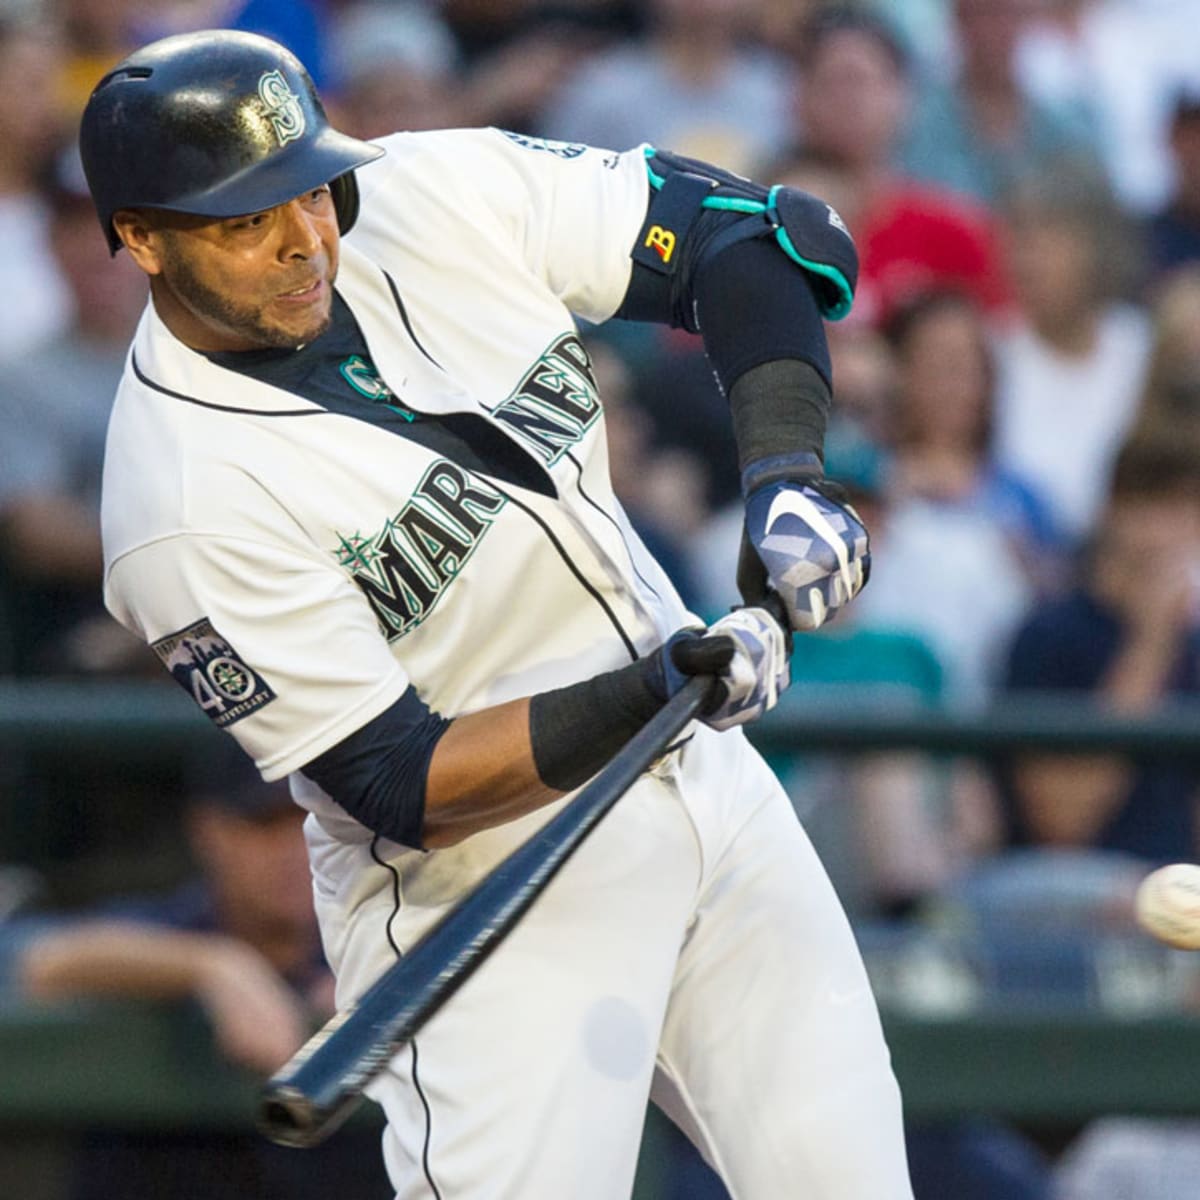 Nelson Cruz is absolutely worth drafting on your fantasy team